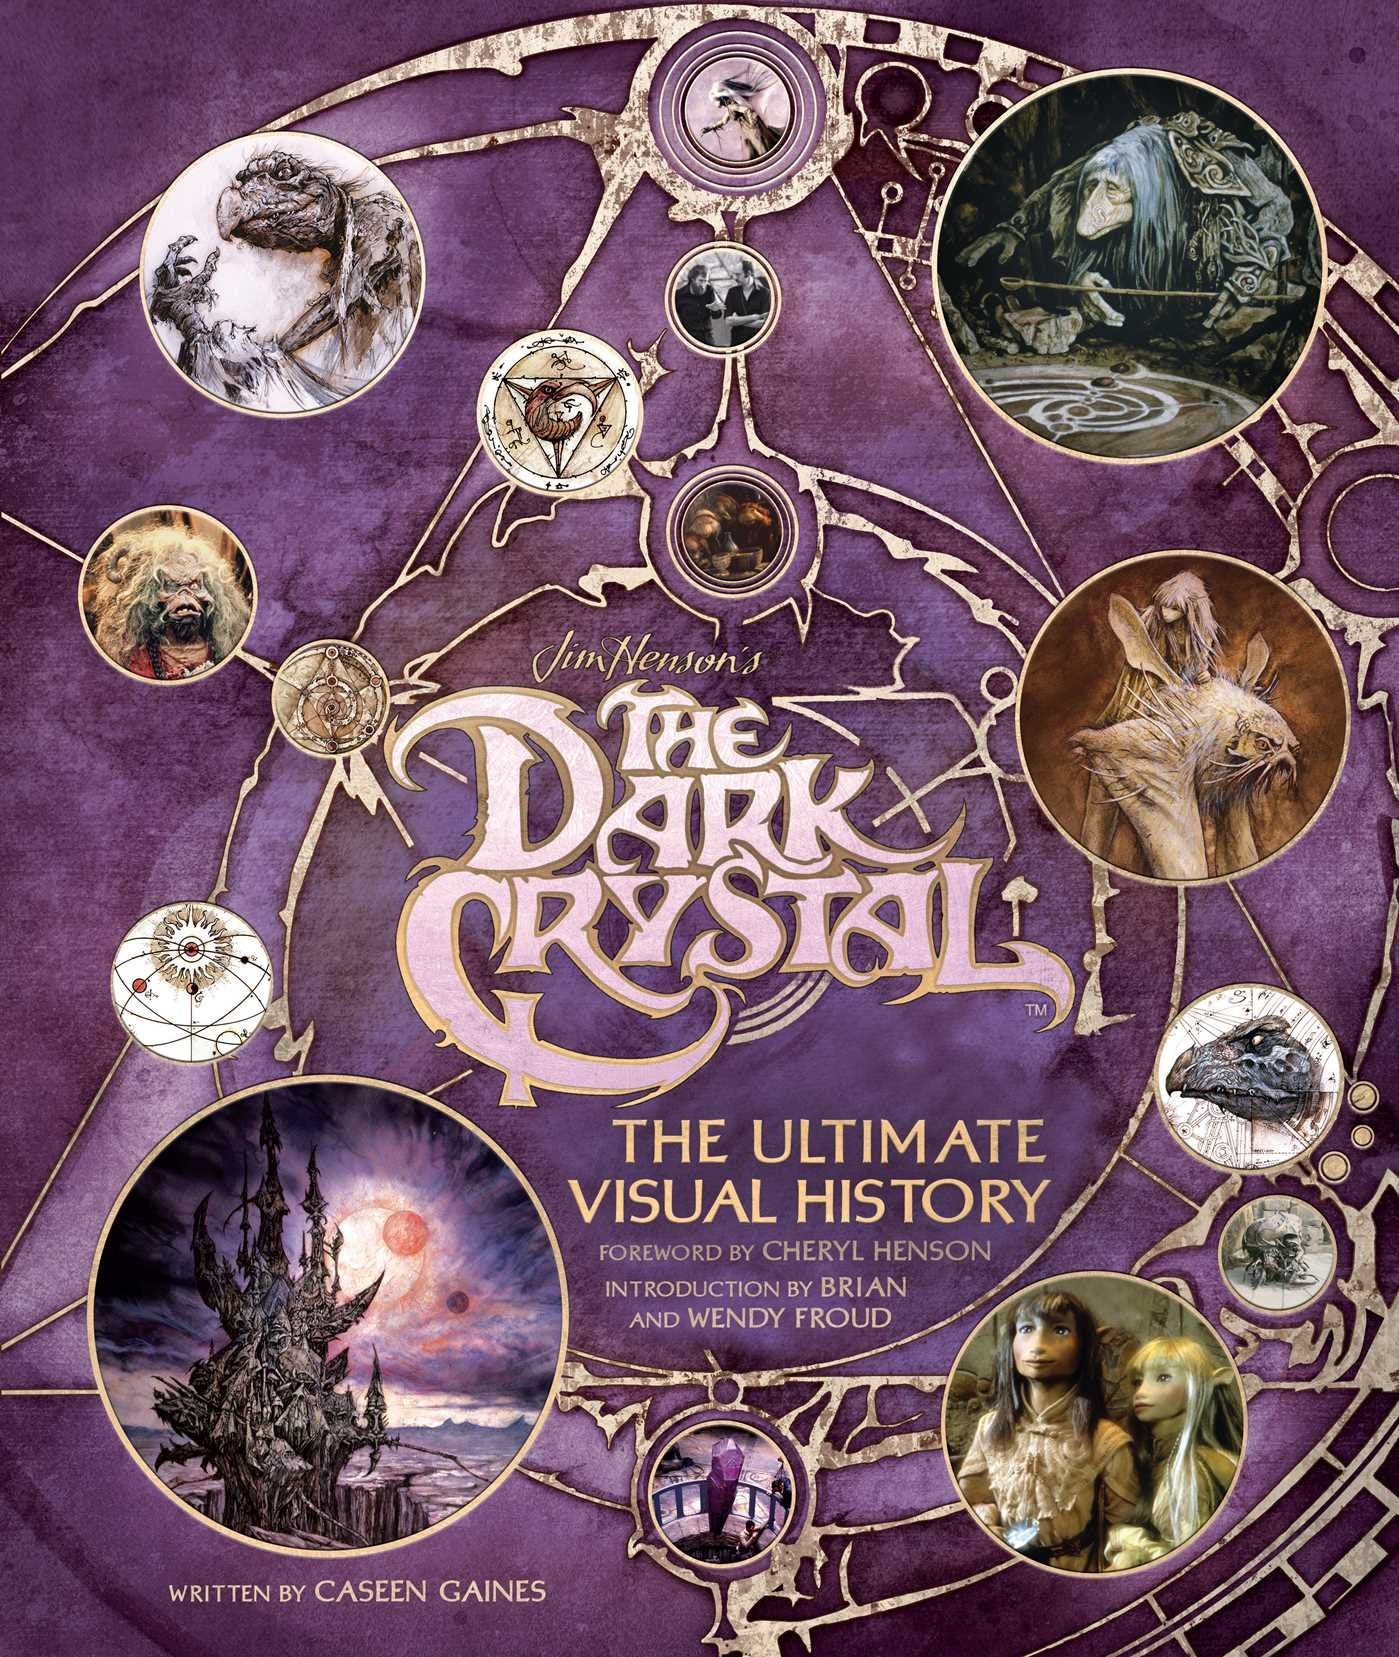 The Dark Crystal: The Ultimate Visual History Hardcover - Illustrated